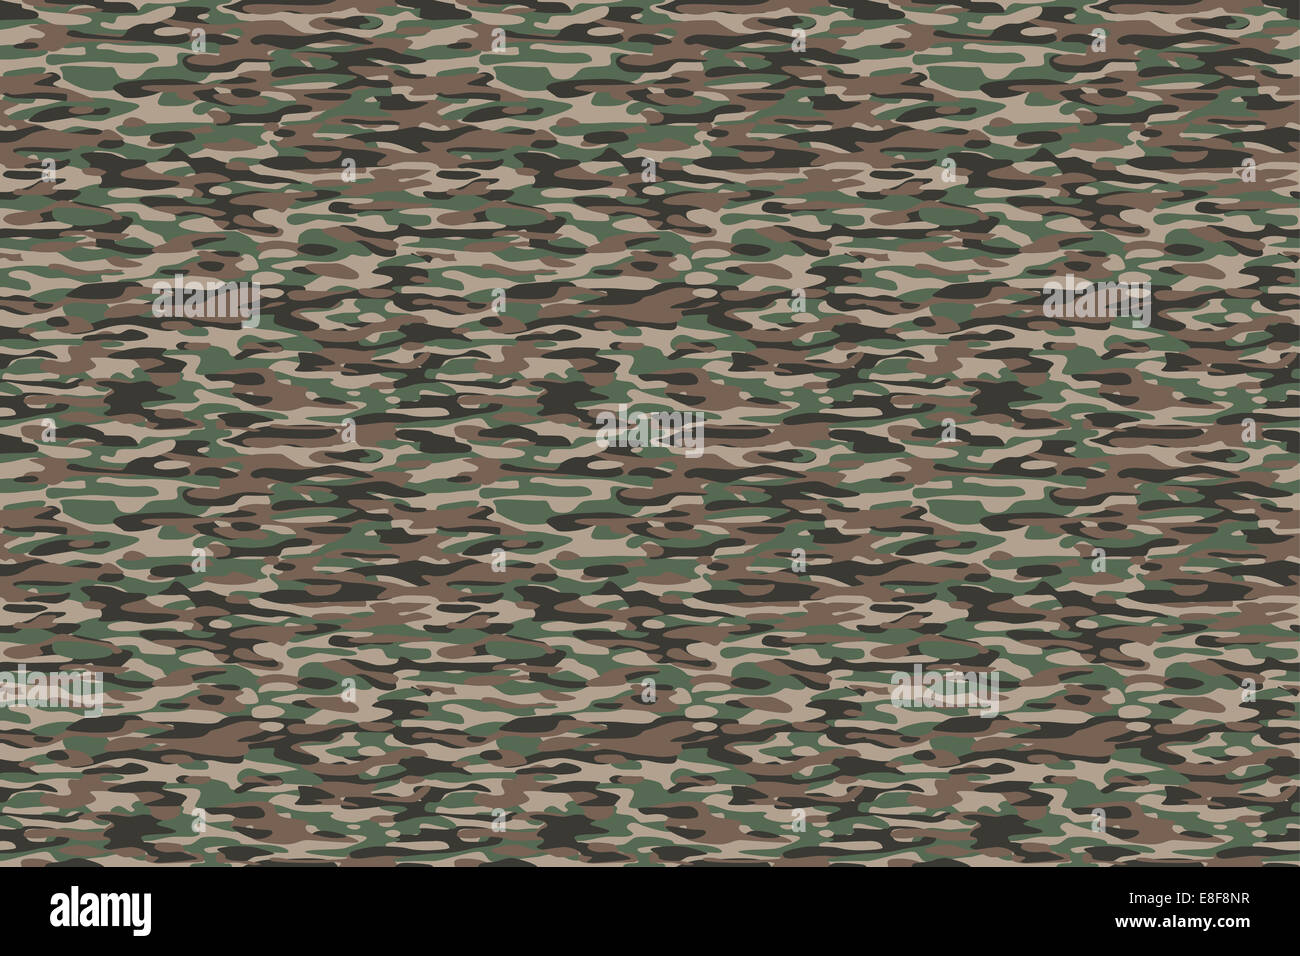 Camouflage Olive Brown Background - Olive brown military camouflage textile pattern. All sides fit perfectly seamless together. Stock Photo